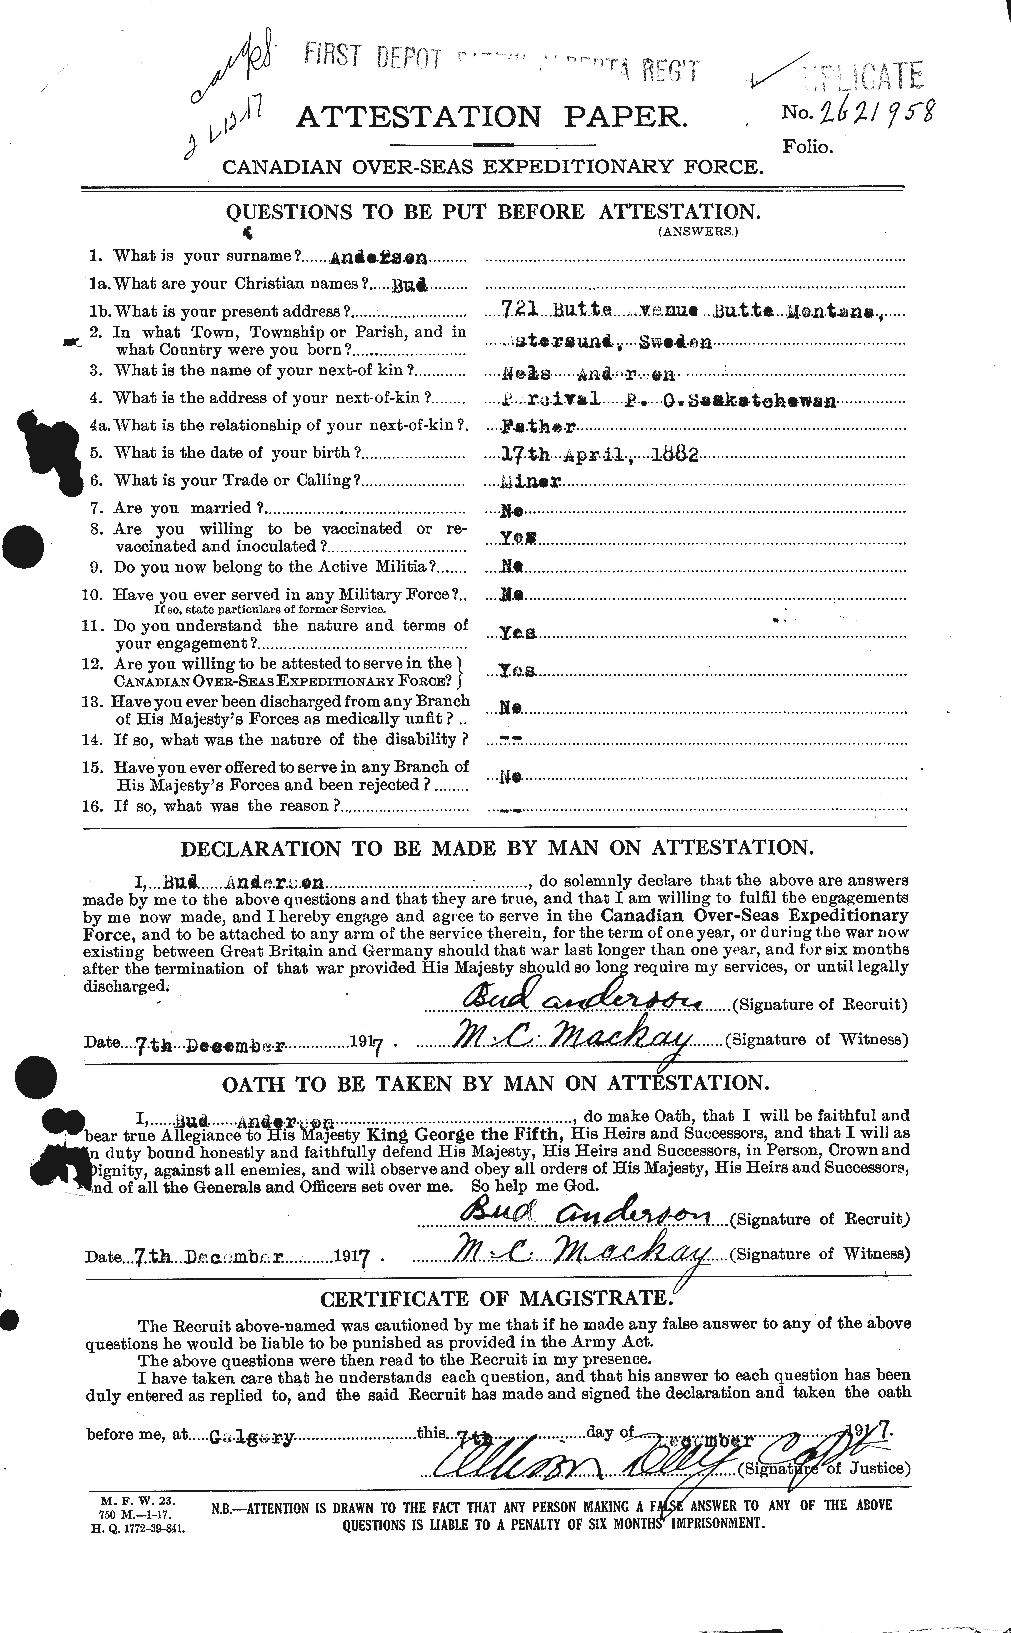 Personnel Records of the First World War - CEF 209300a